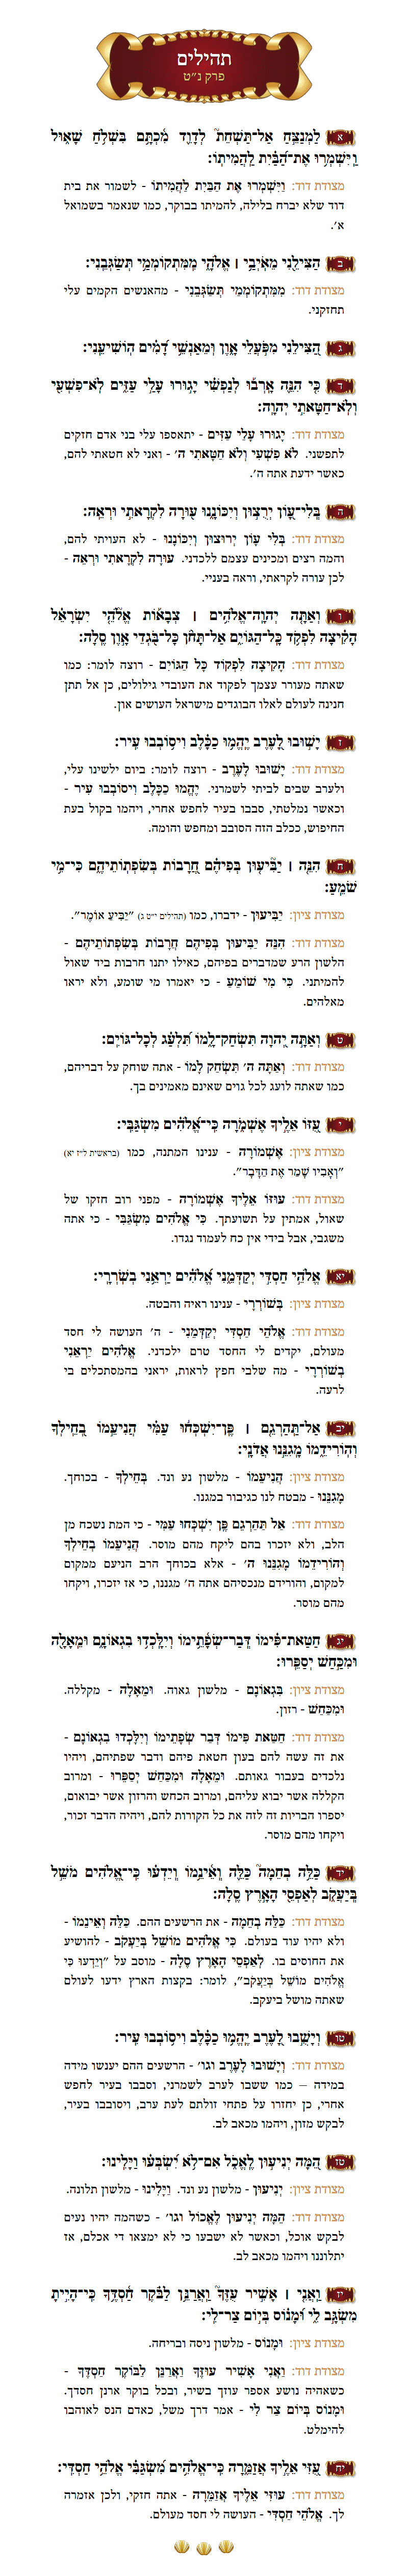 Sefer Tehillim Chapter 59 with commentary